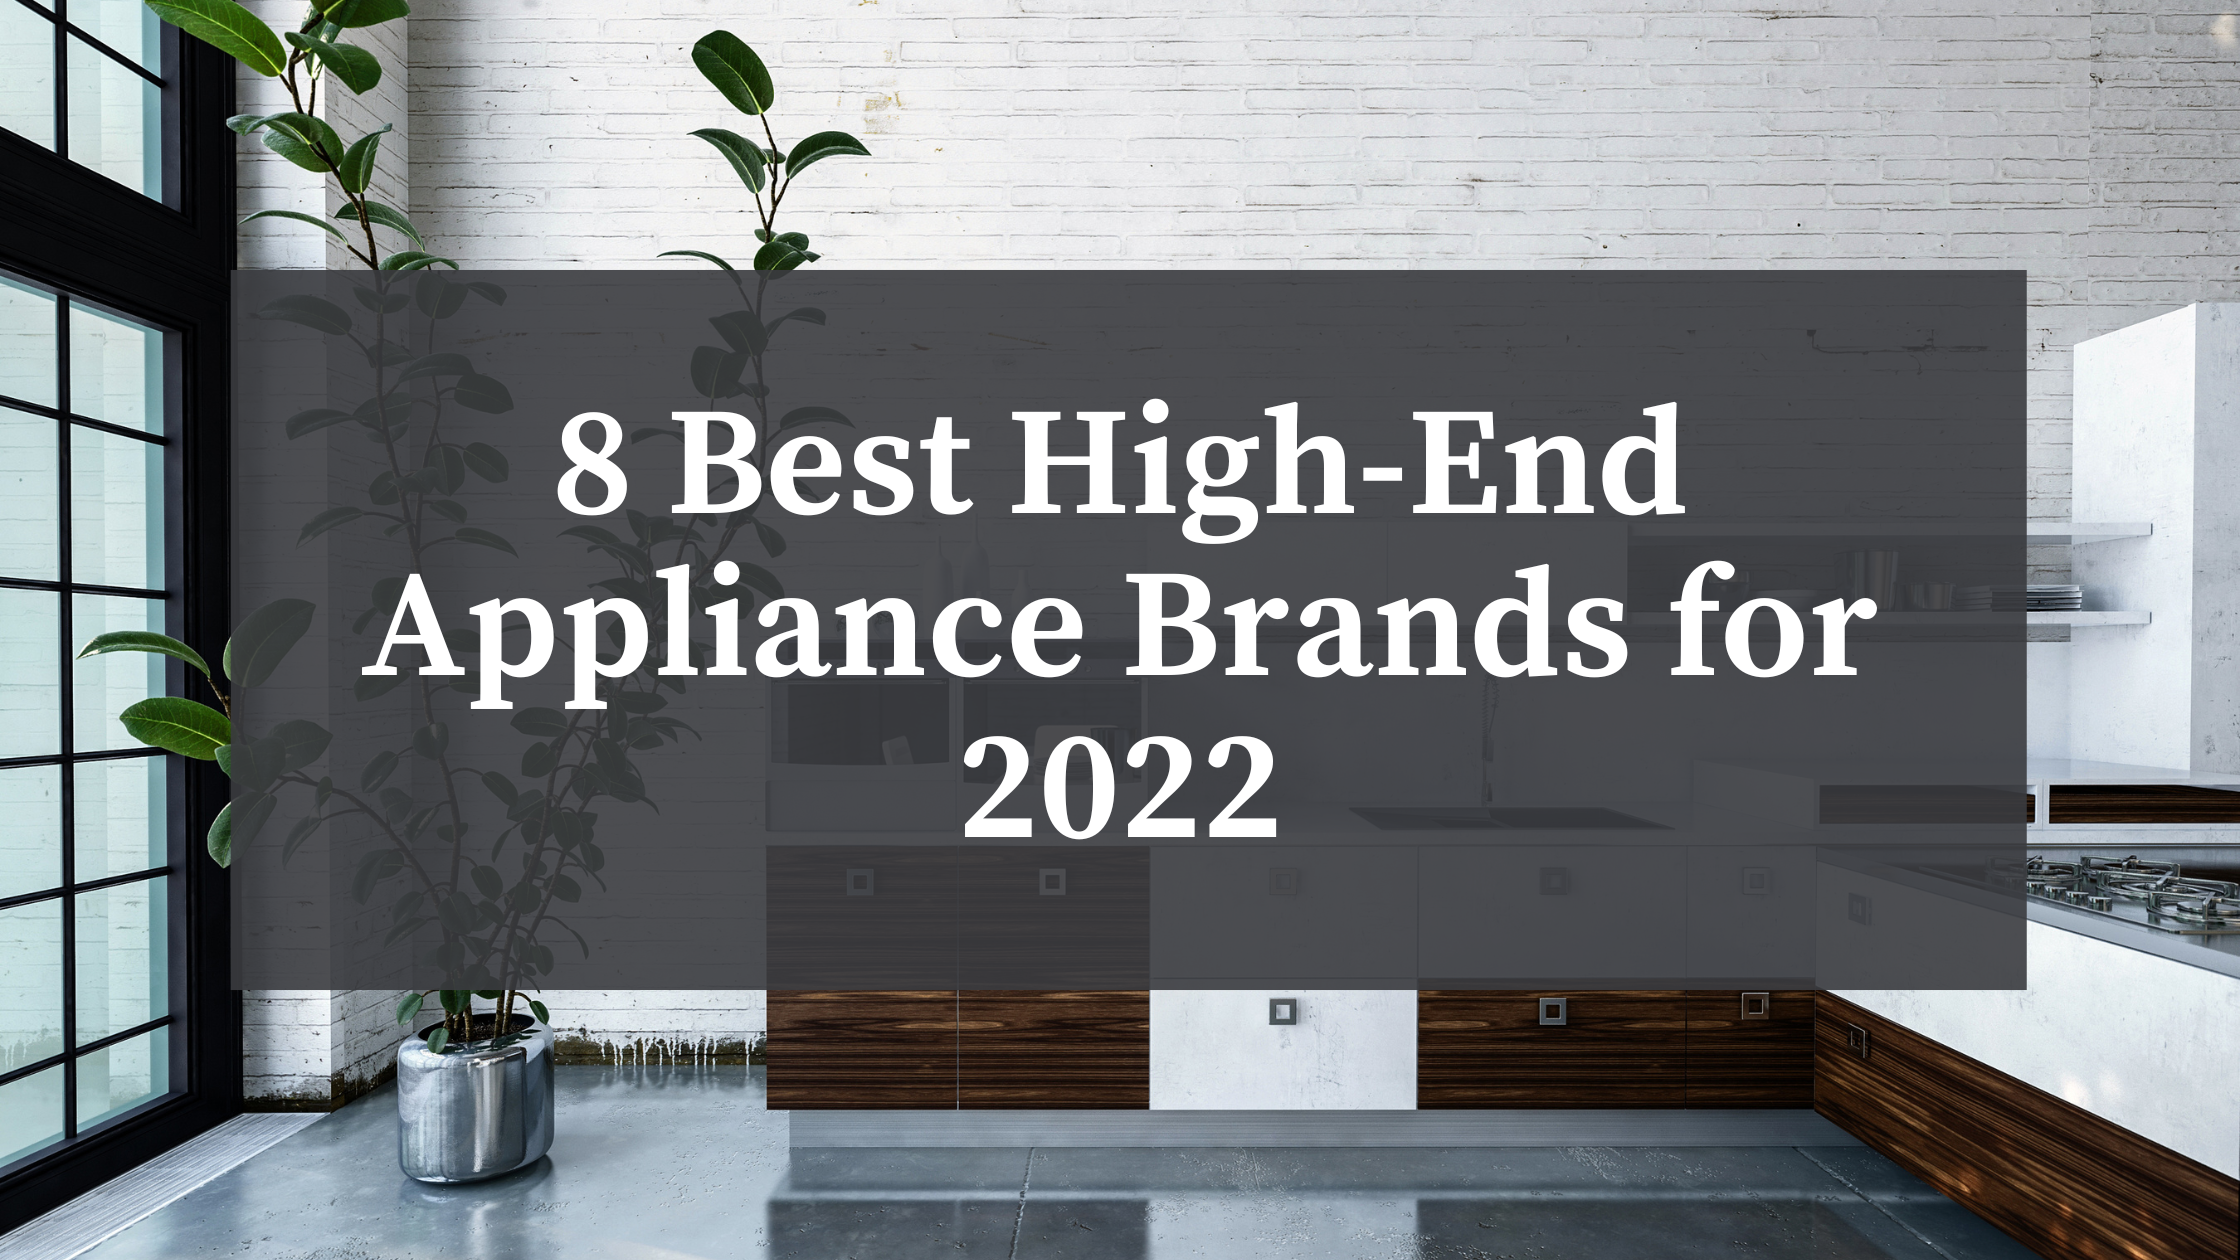 8 Best High-End Appliance Brands for 2022 